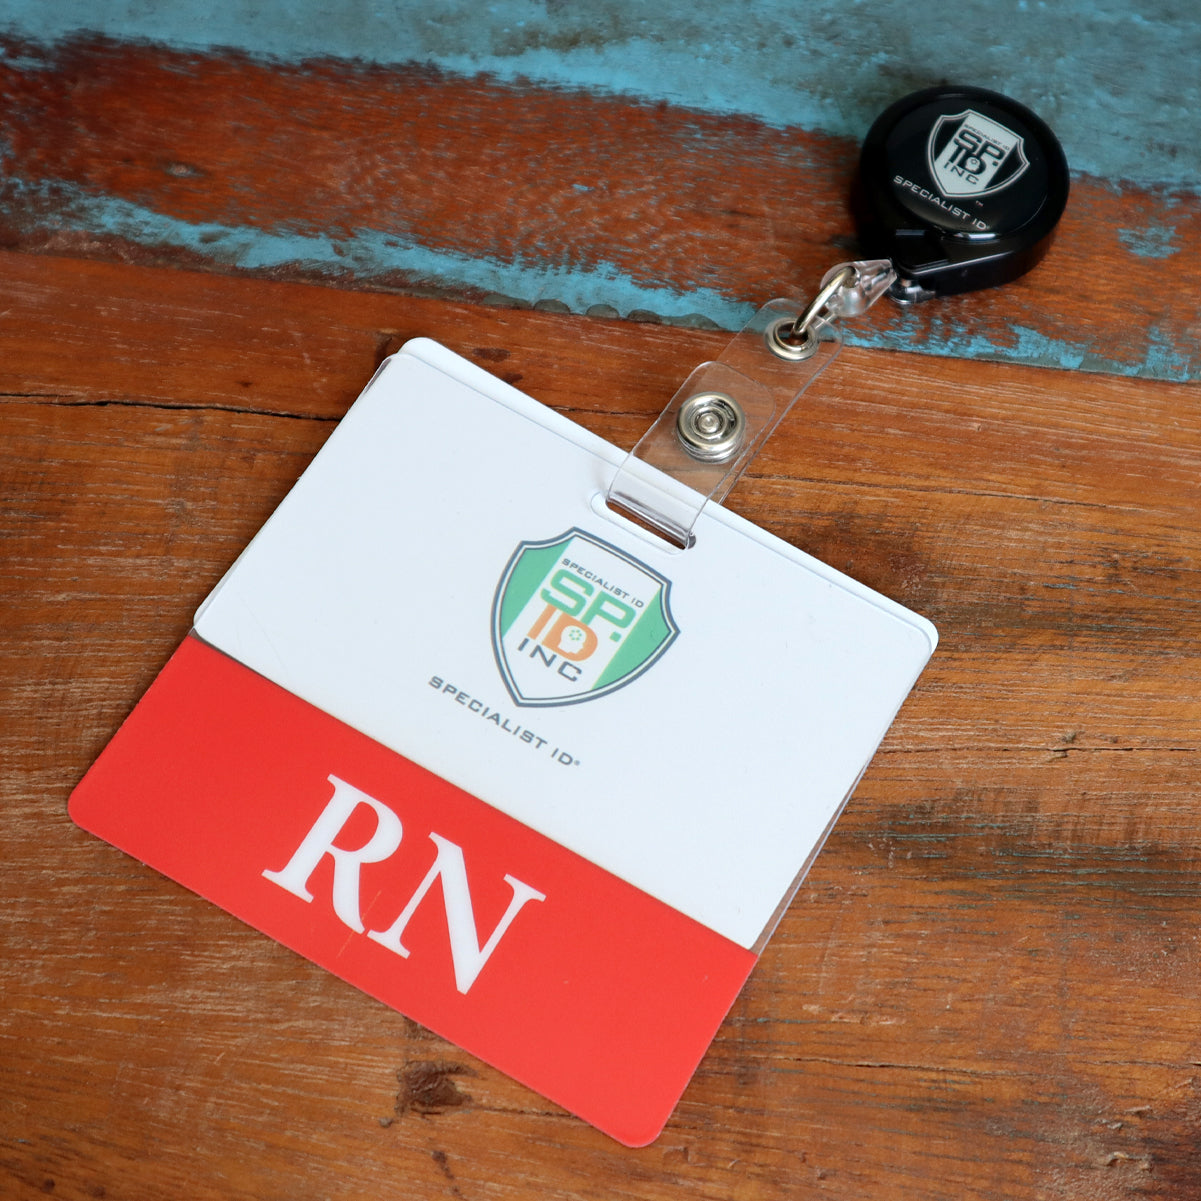 A name badge holder on a retractable clip is placed on a wooden surface. The Clear RN Badge Buddy - Horizontal ID Badge Backer for Nurses - Double Sided Print has an emblem and the letters "RN" printed on it.